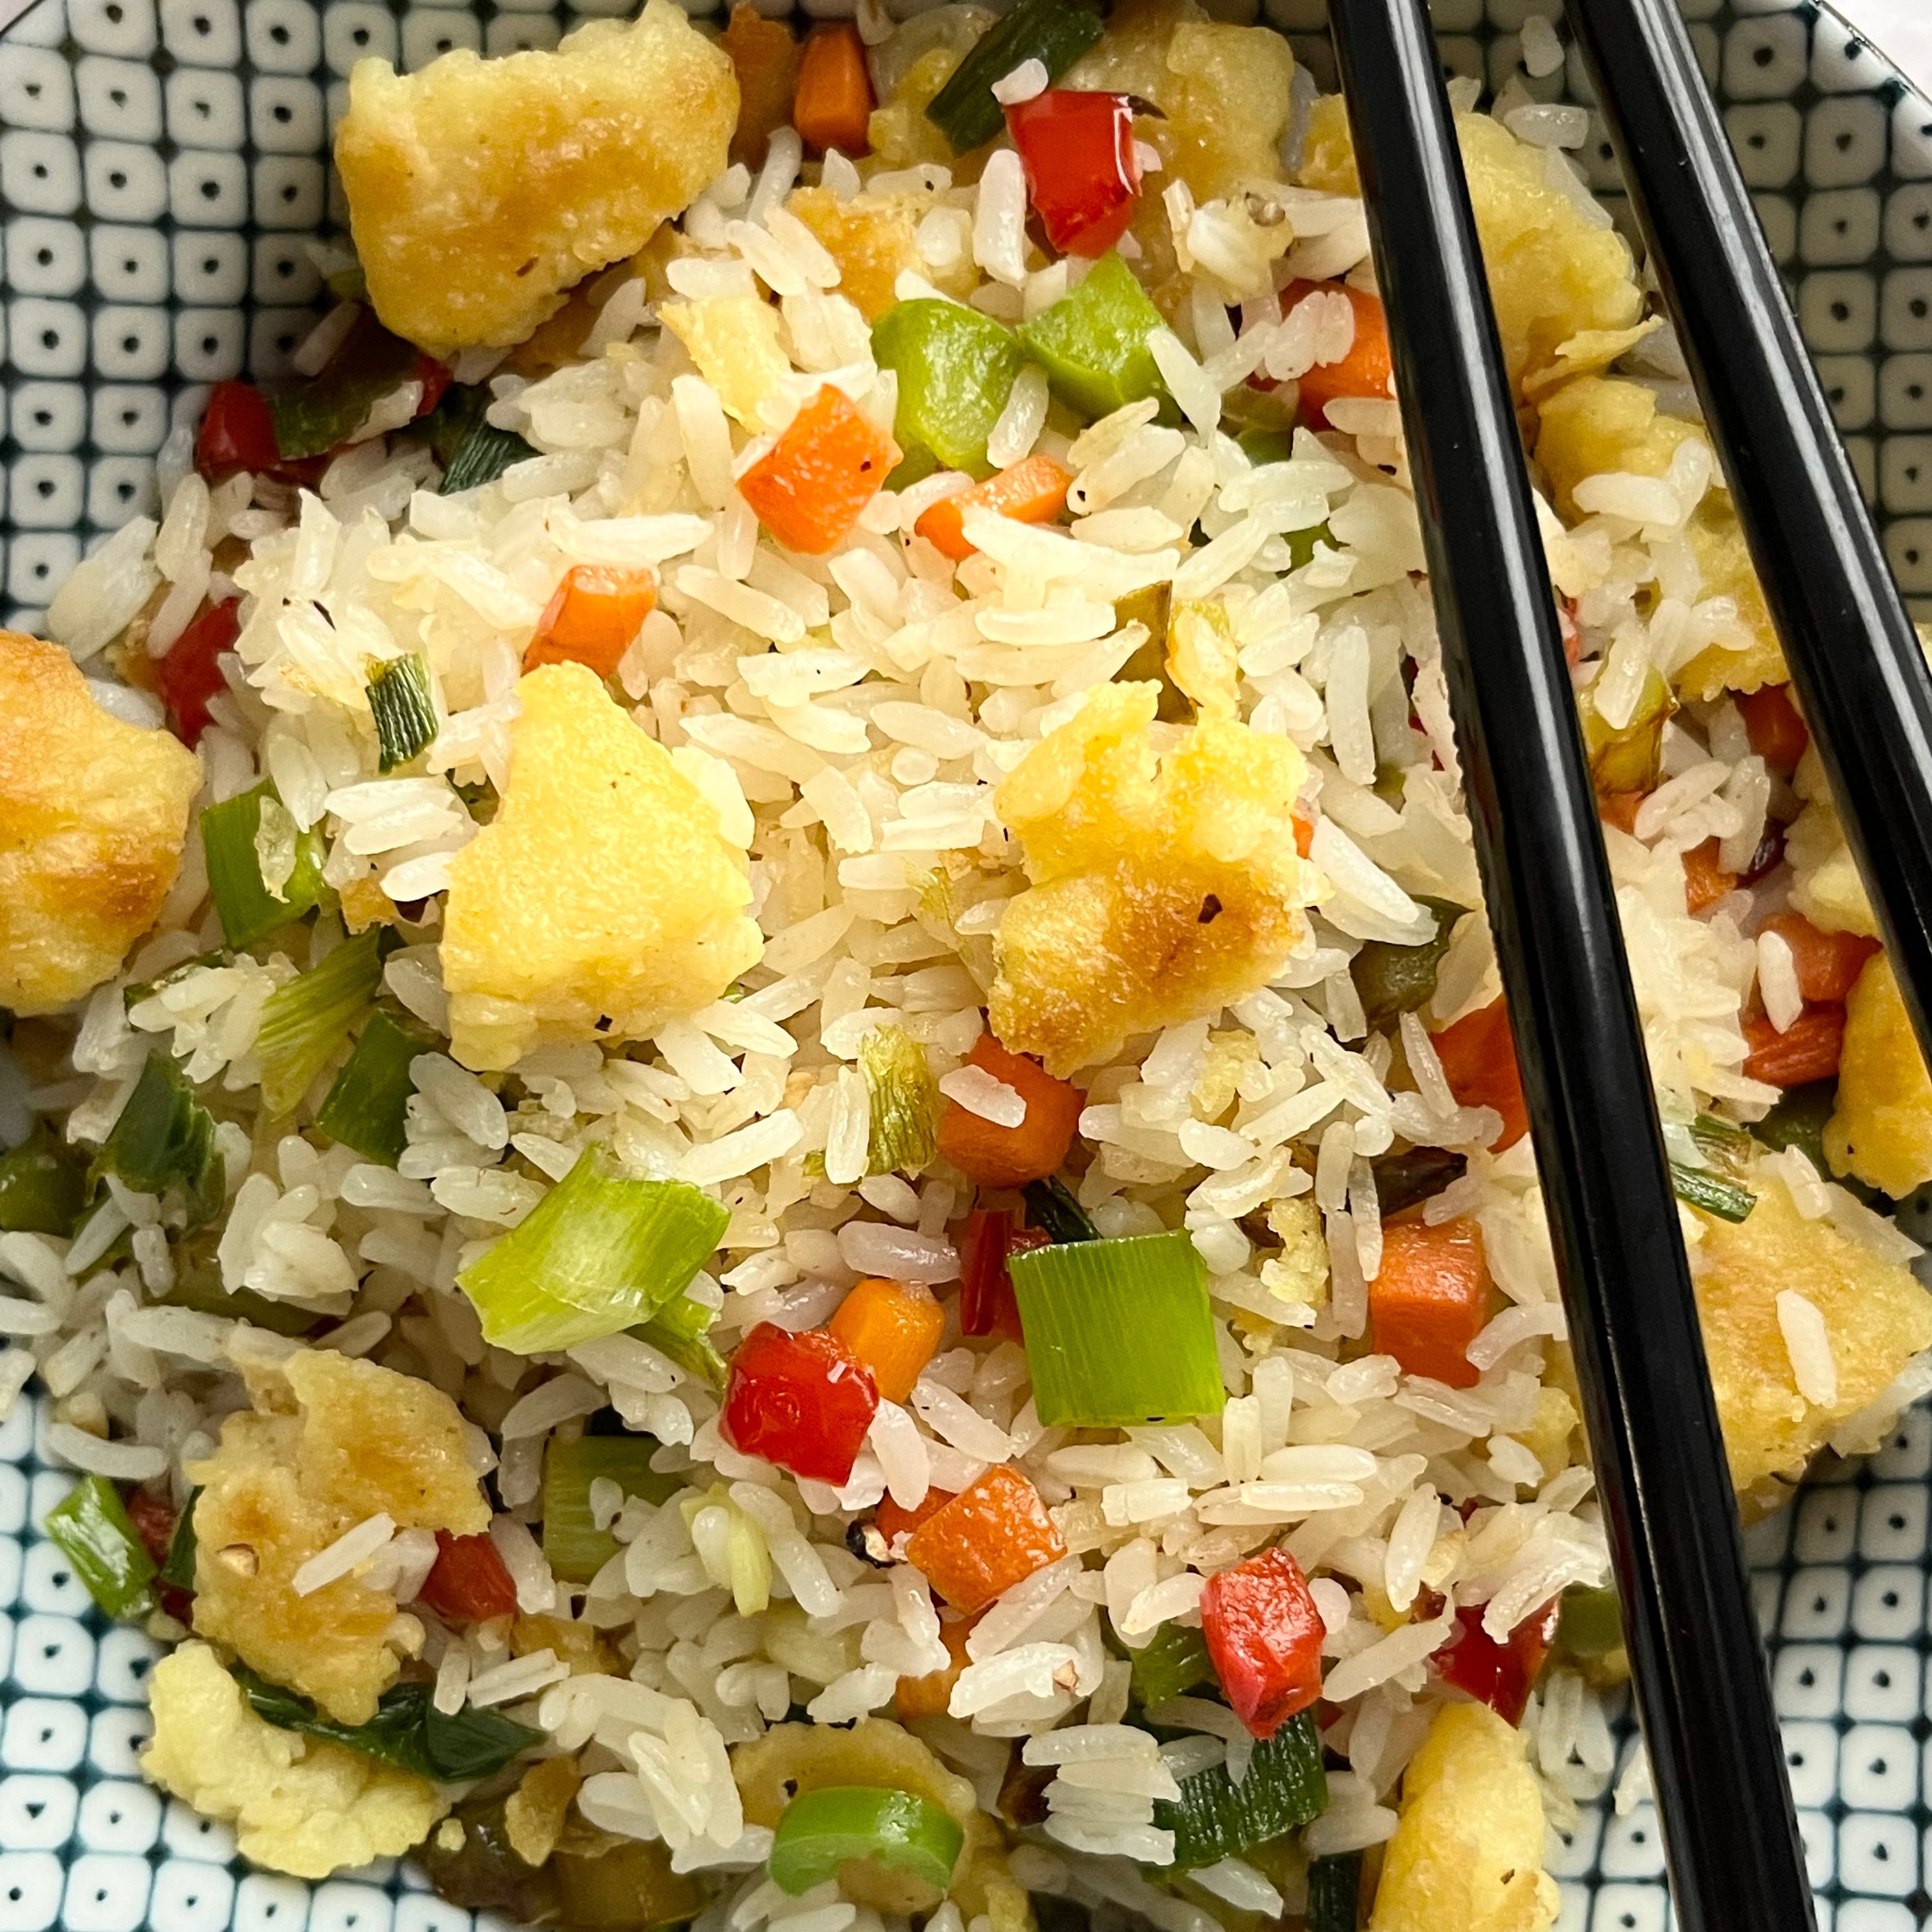 Fried Rice with veggies and nummy nibbles mung based egg mix along with chopsticks